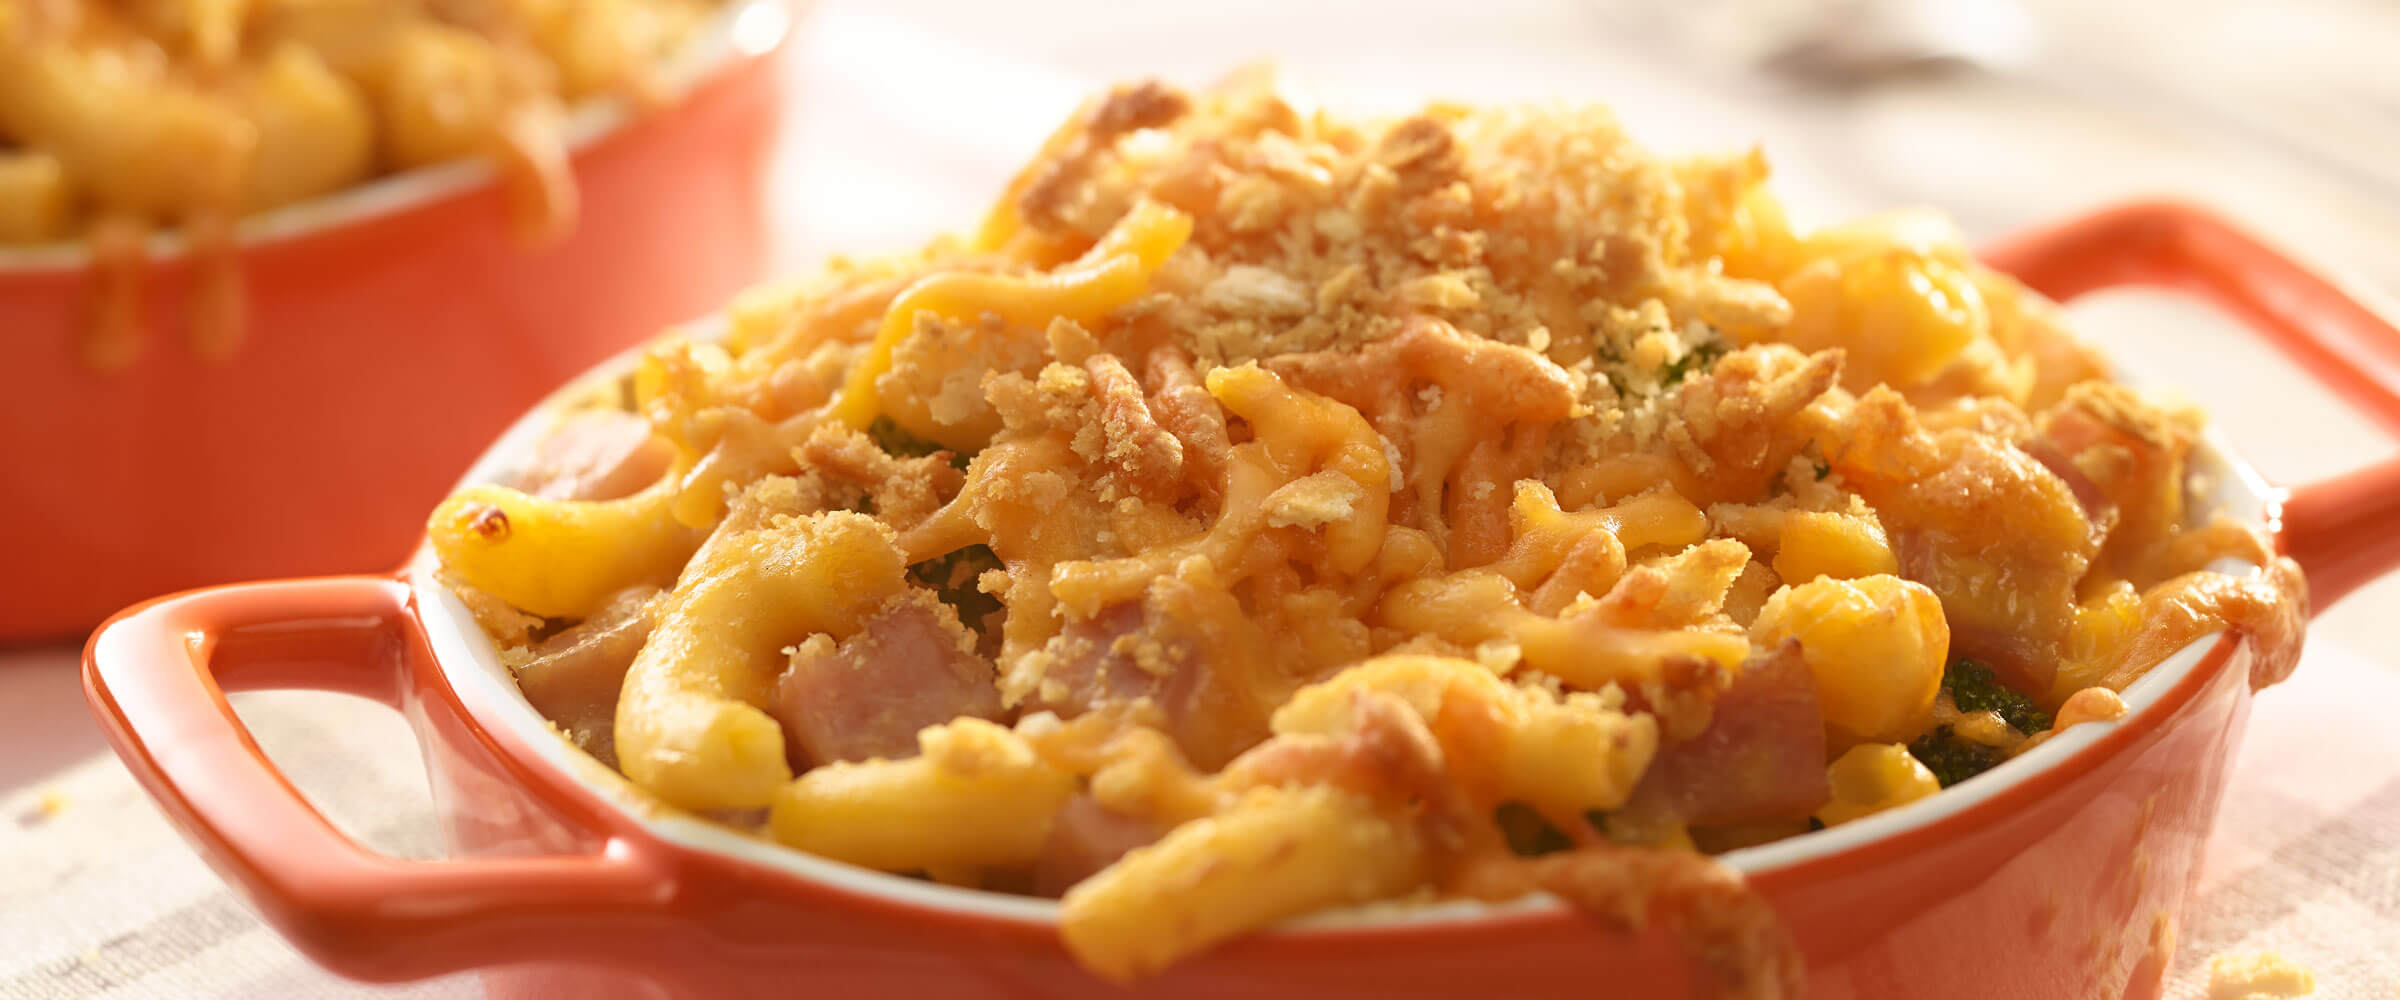 Ham and Broccoli Mac and Cheese bake in red dish